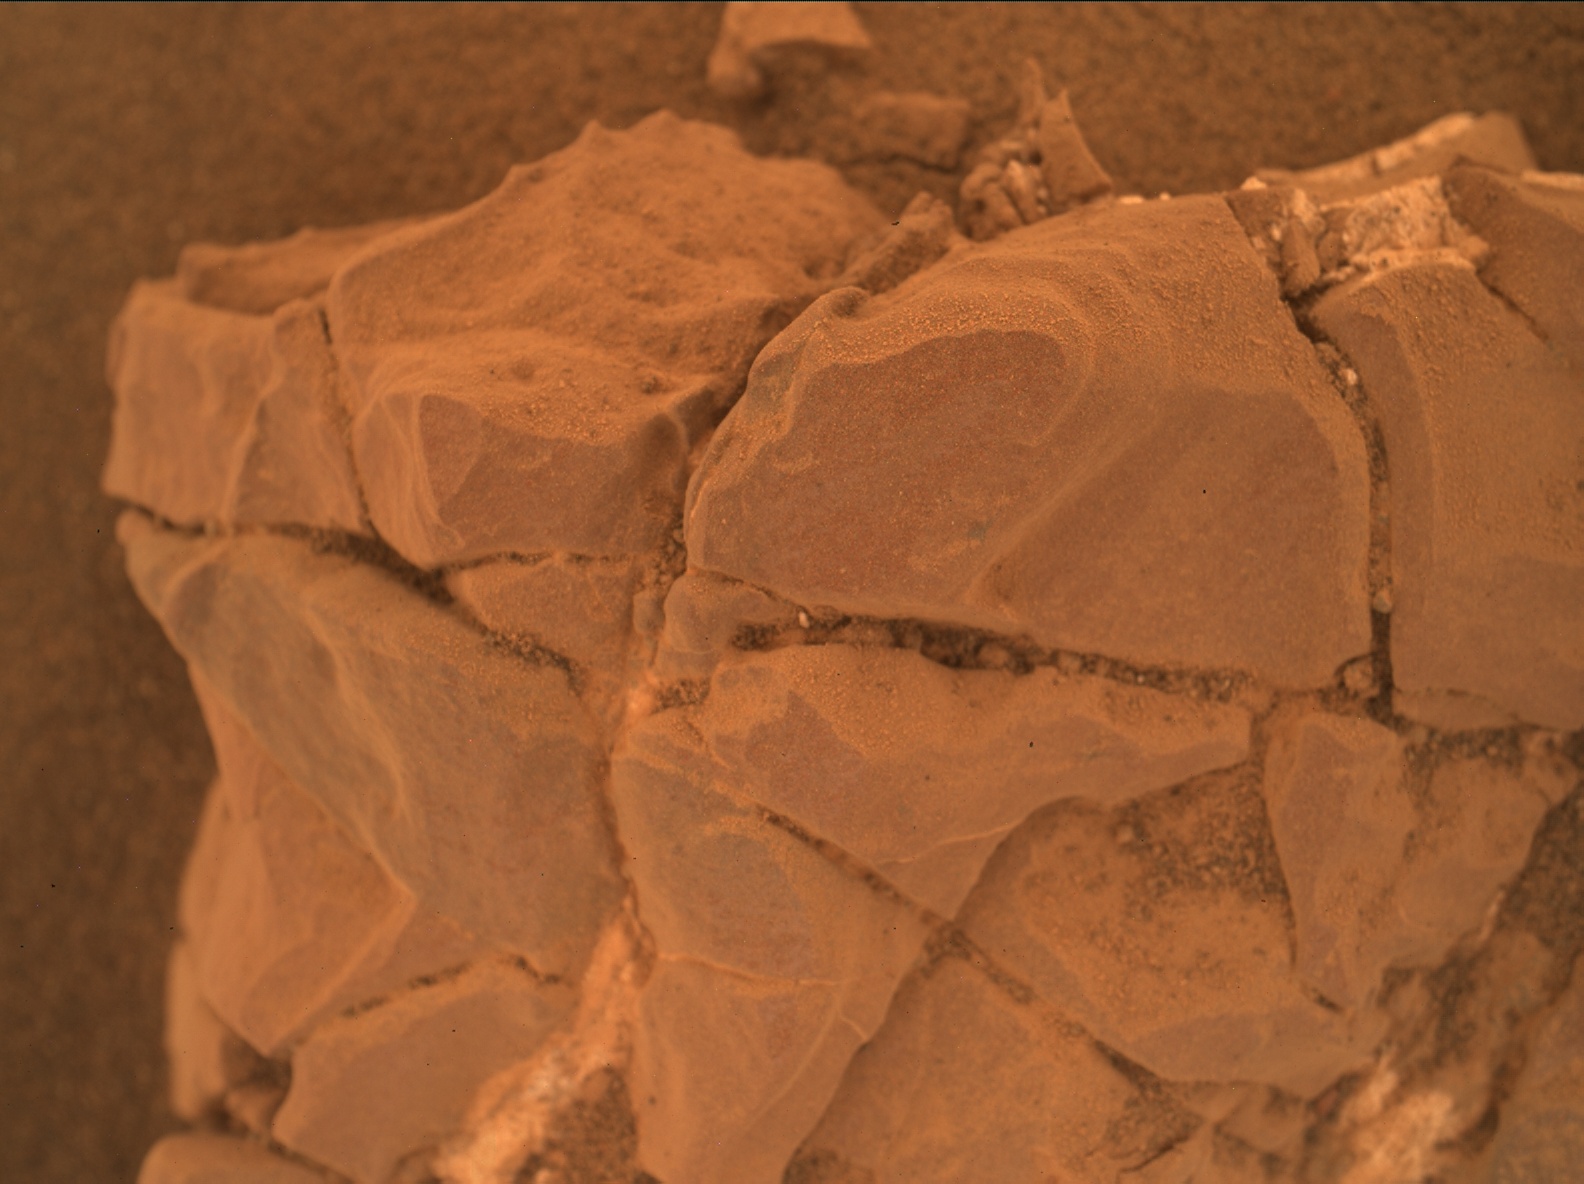 Nasa's Mars rover Curiosity acquired this image using its Mars Hand Lens Imager (MAHLI) on Sol 2108